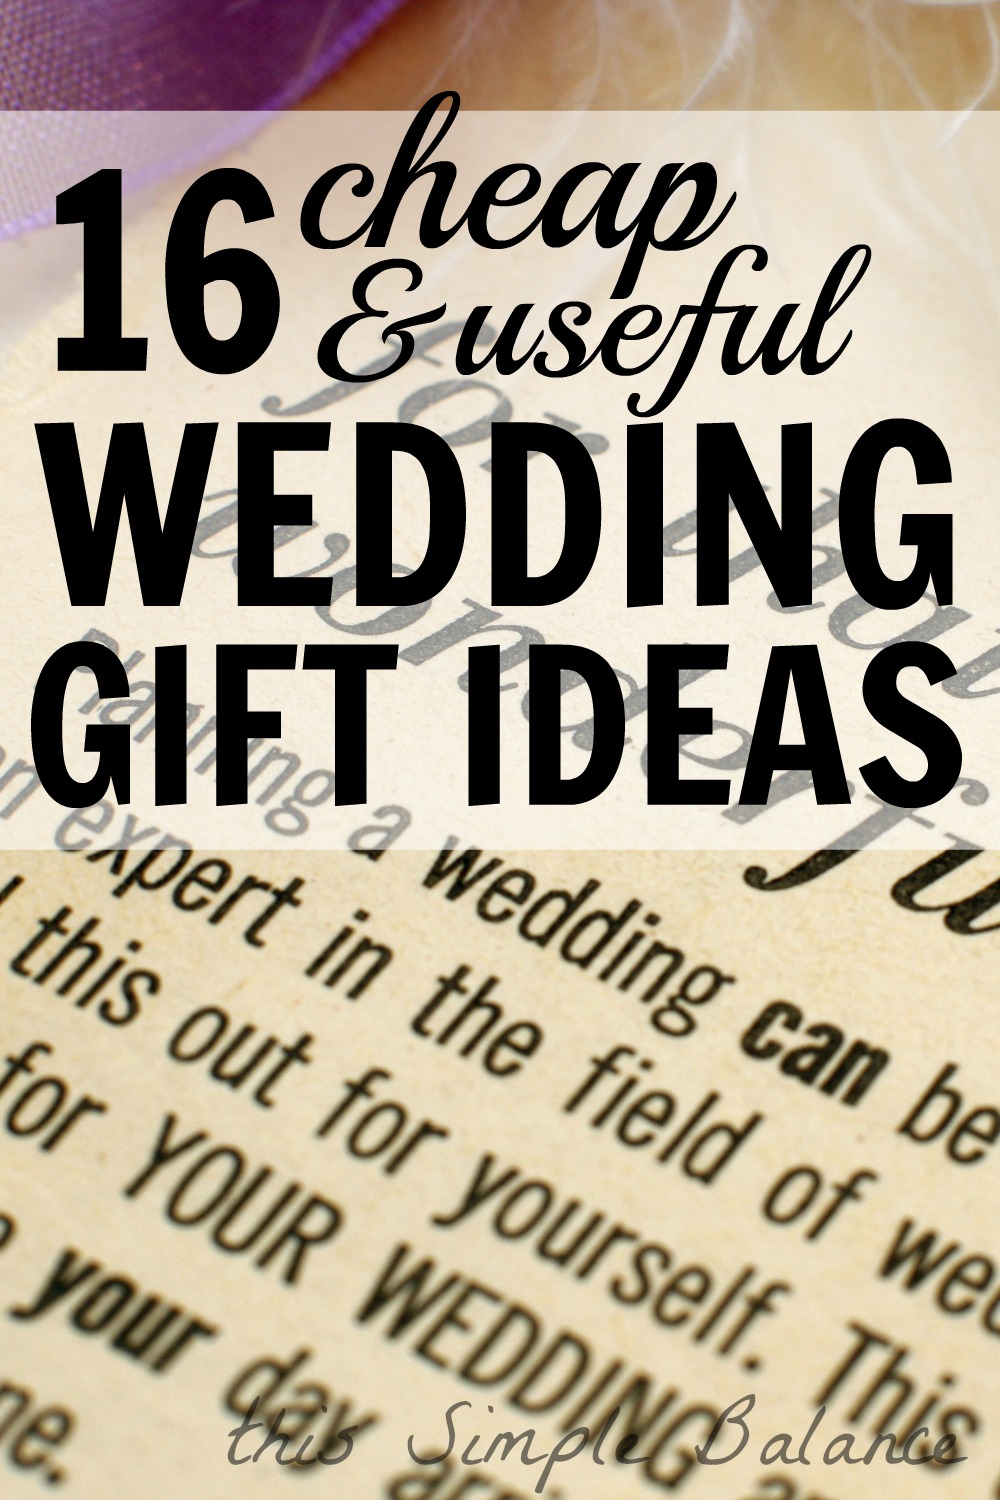 Wedding gifts for when the couple have everything | HerCanberra